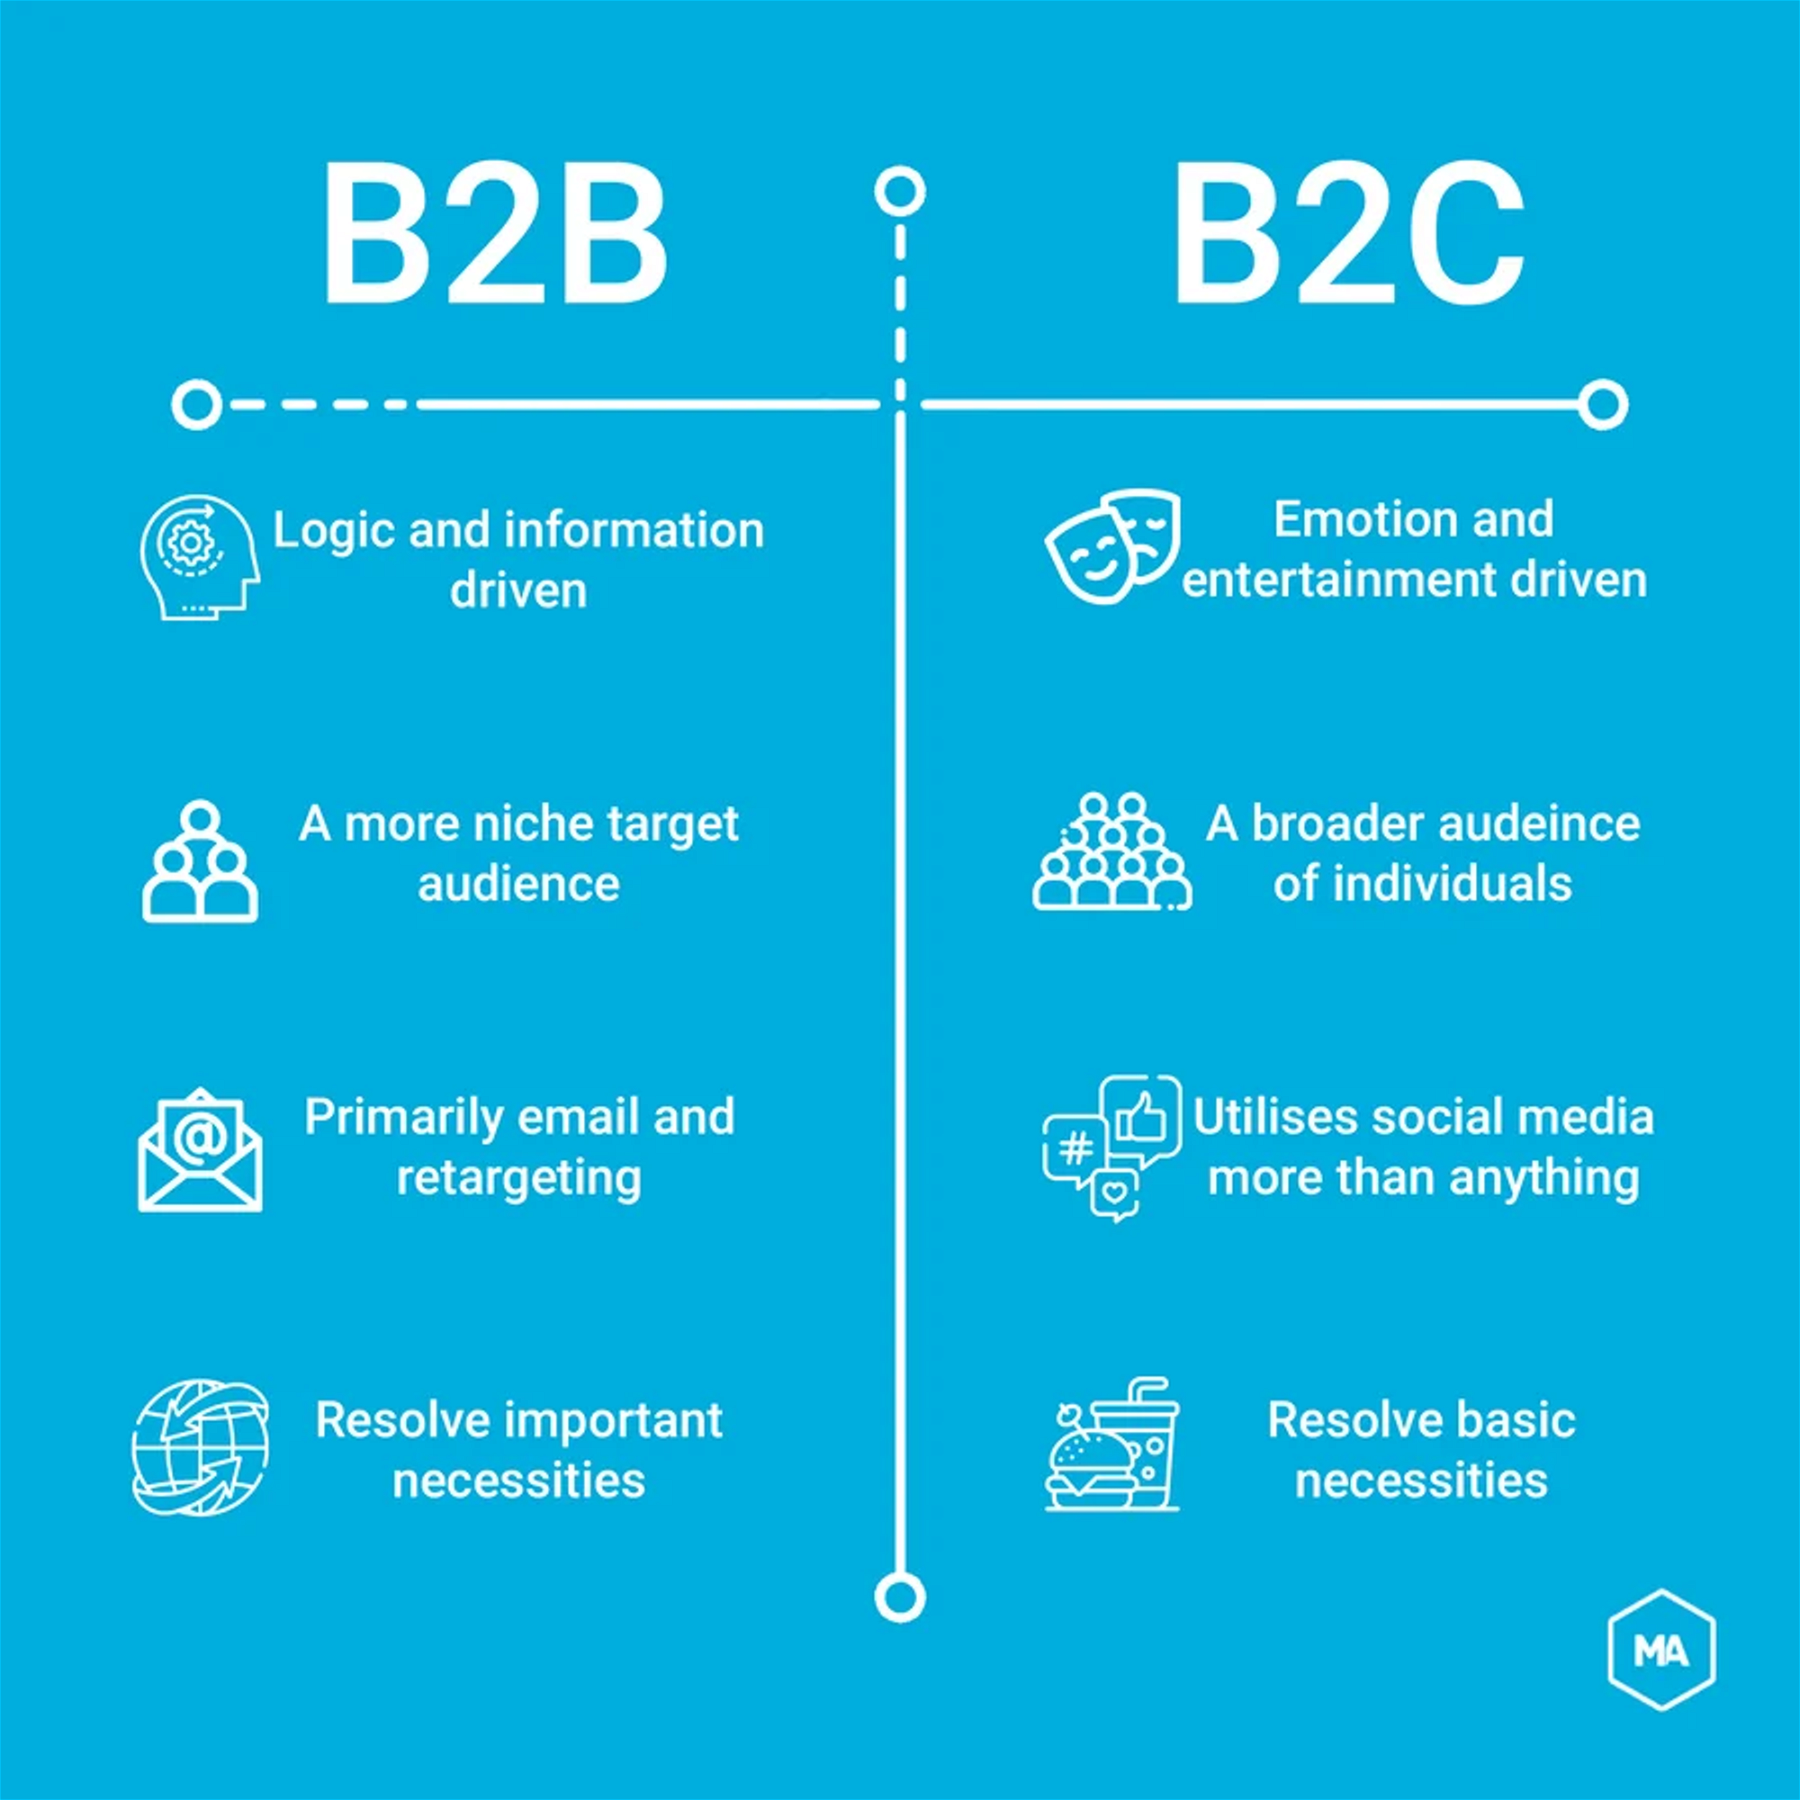 Graphic: Differences Between B2C and B2B Content Marketing | Source: LXA